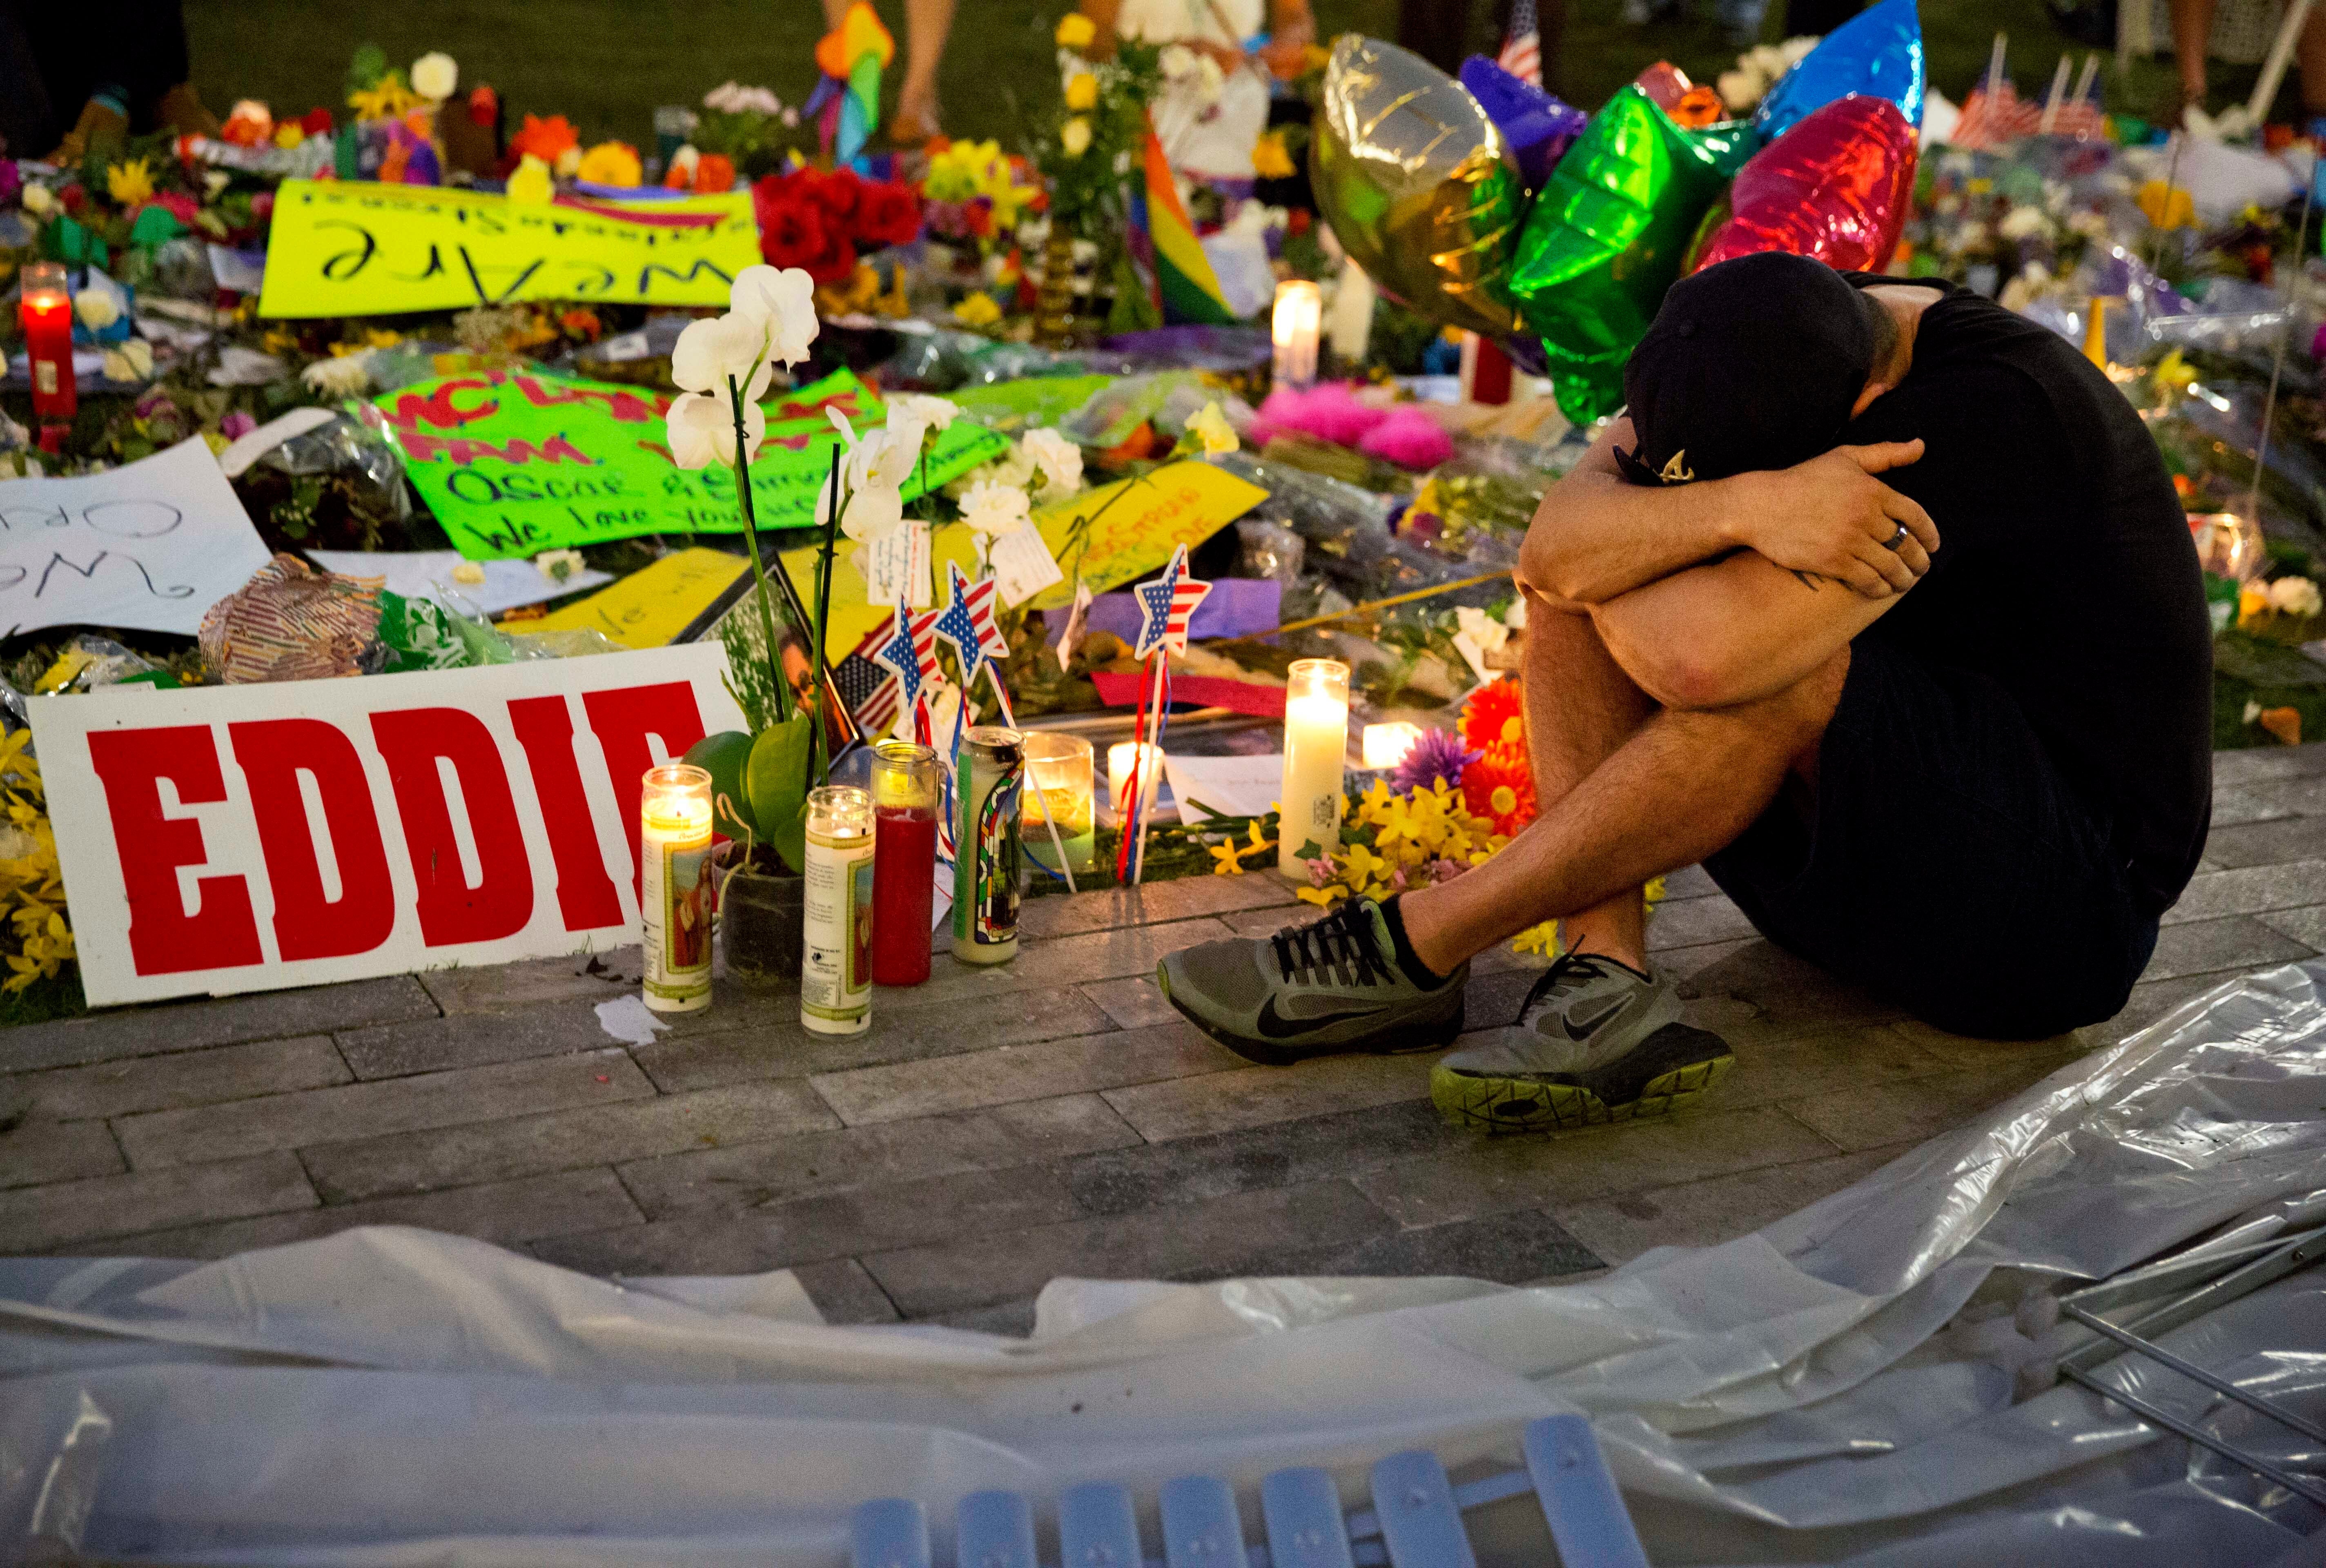 A makeshift memorial for the victims at the Pulse nightclub in 2016